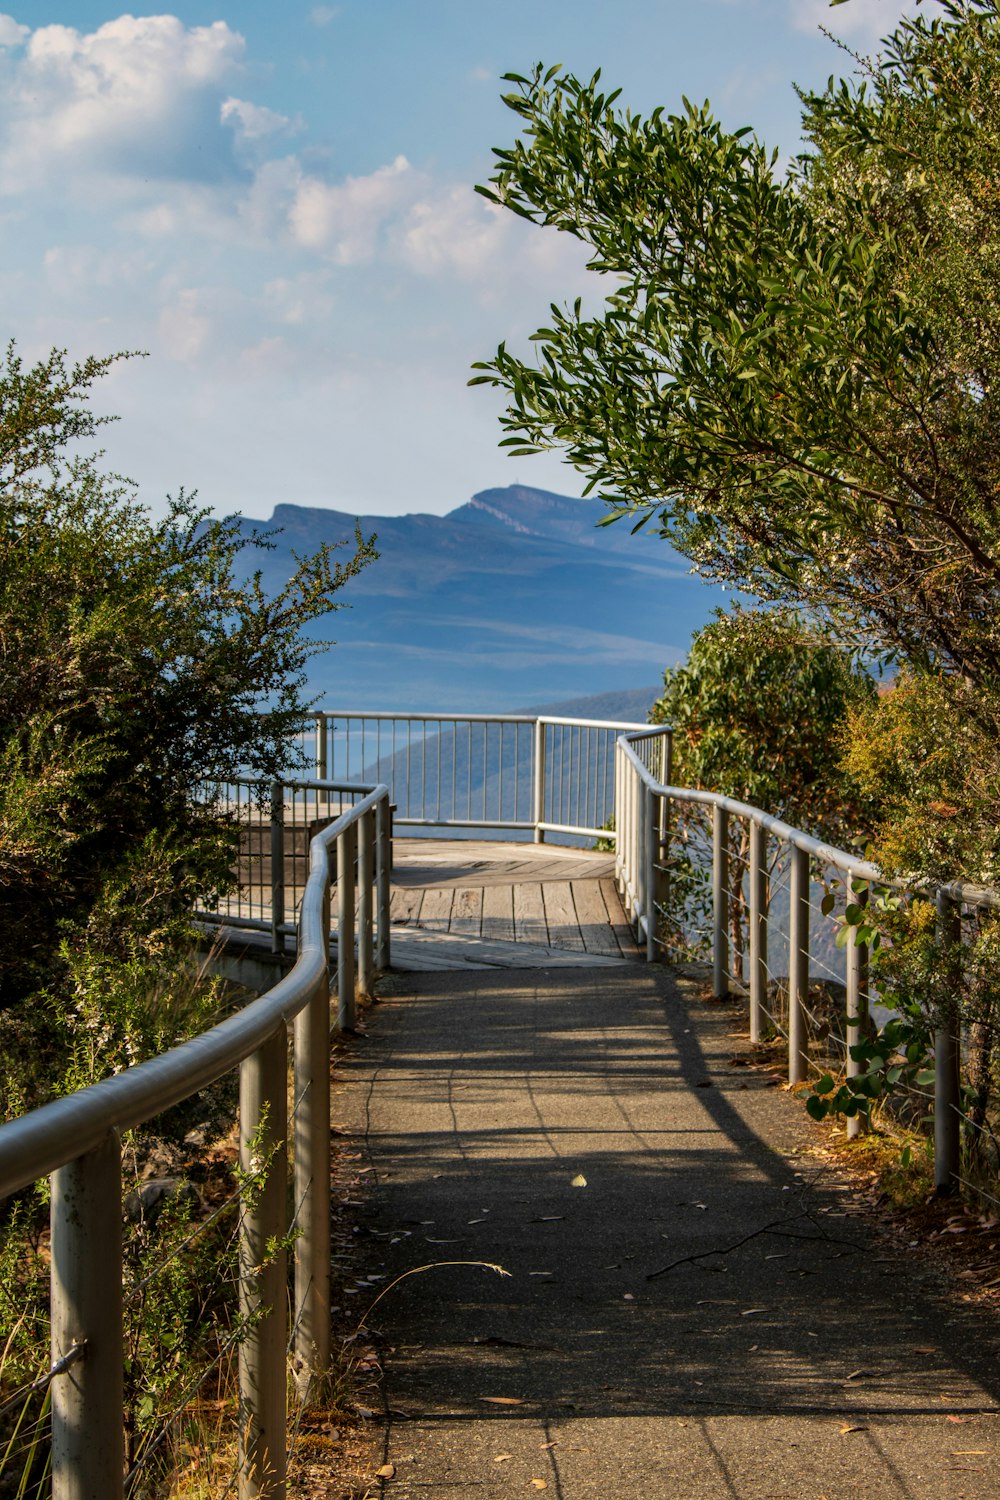 a walkway leading to the ocean with mountains in the background